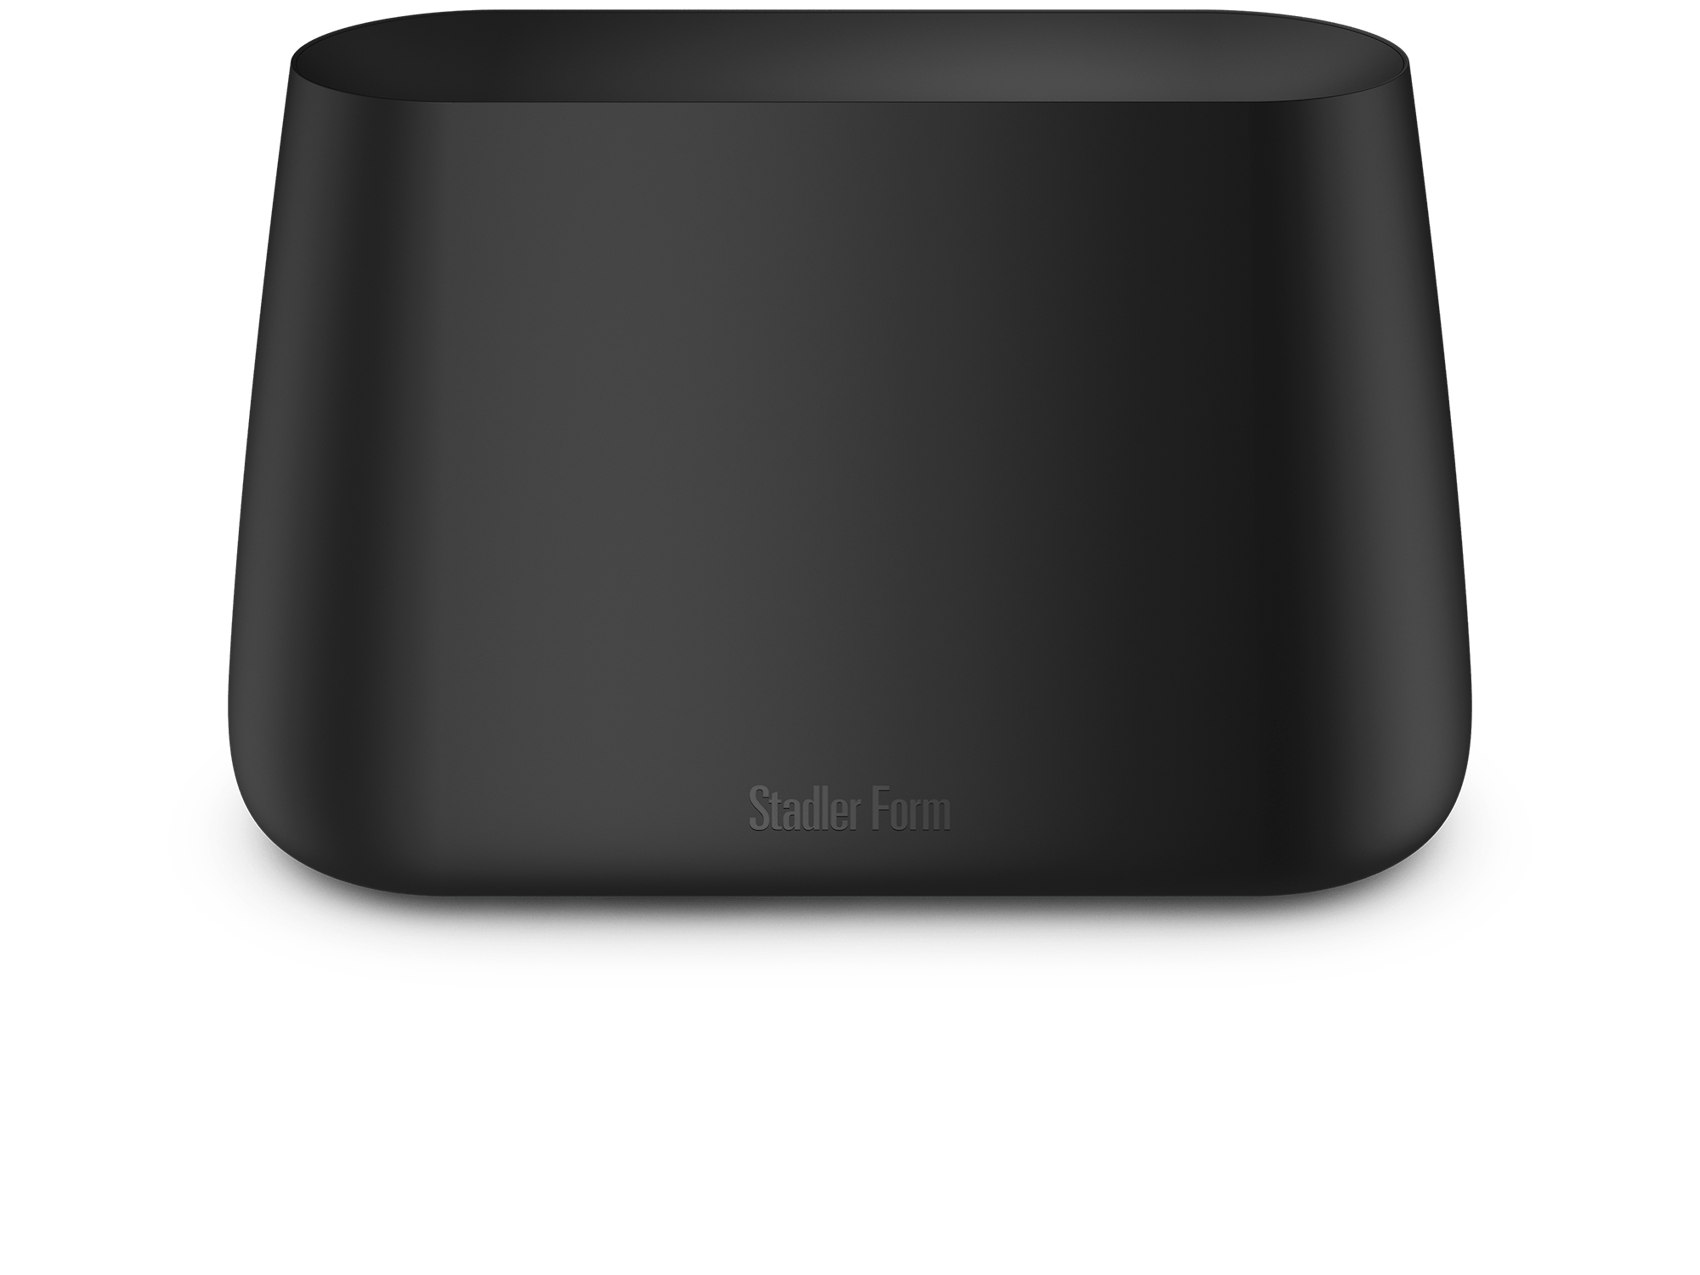 Ben humidifier by Stadler Form in black as front view